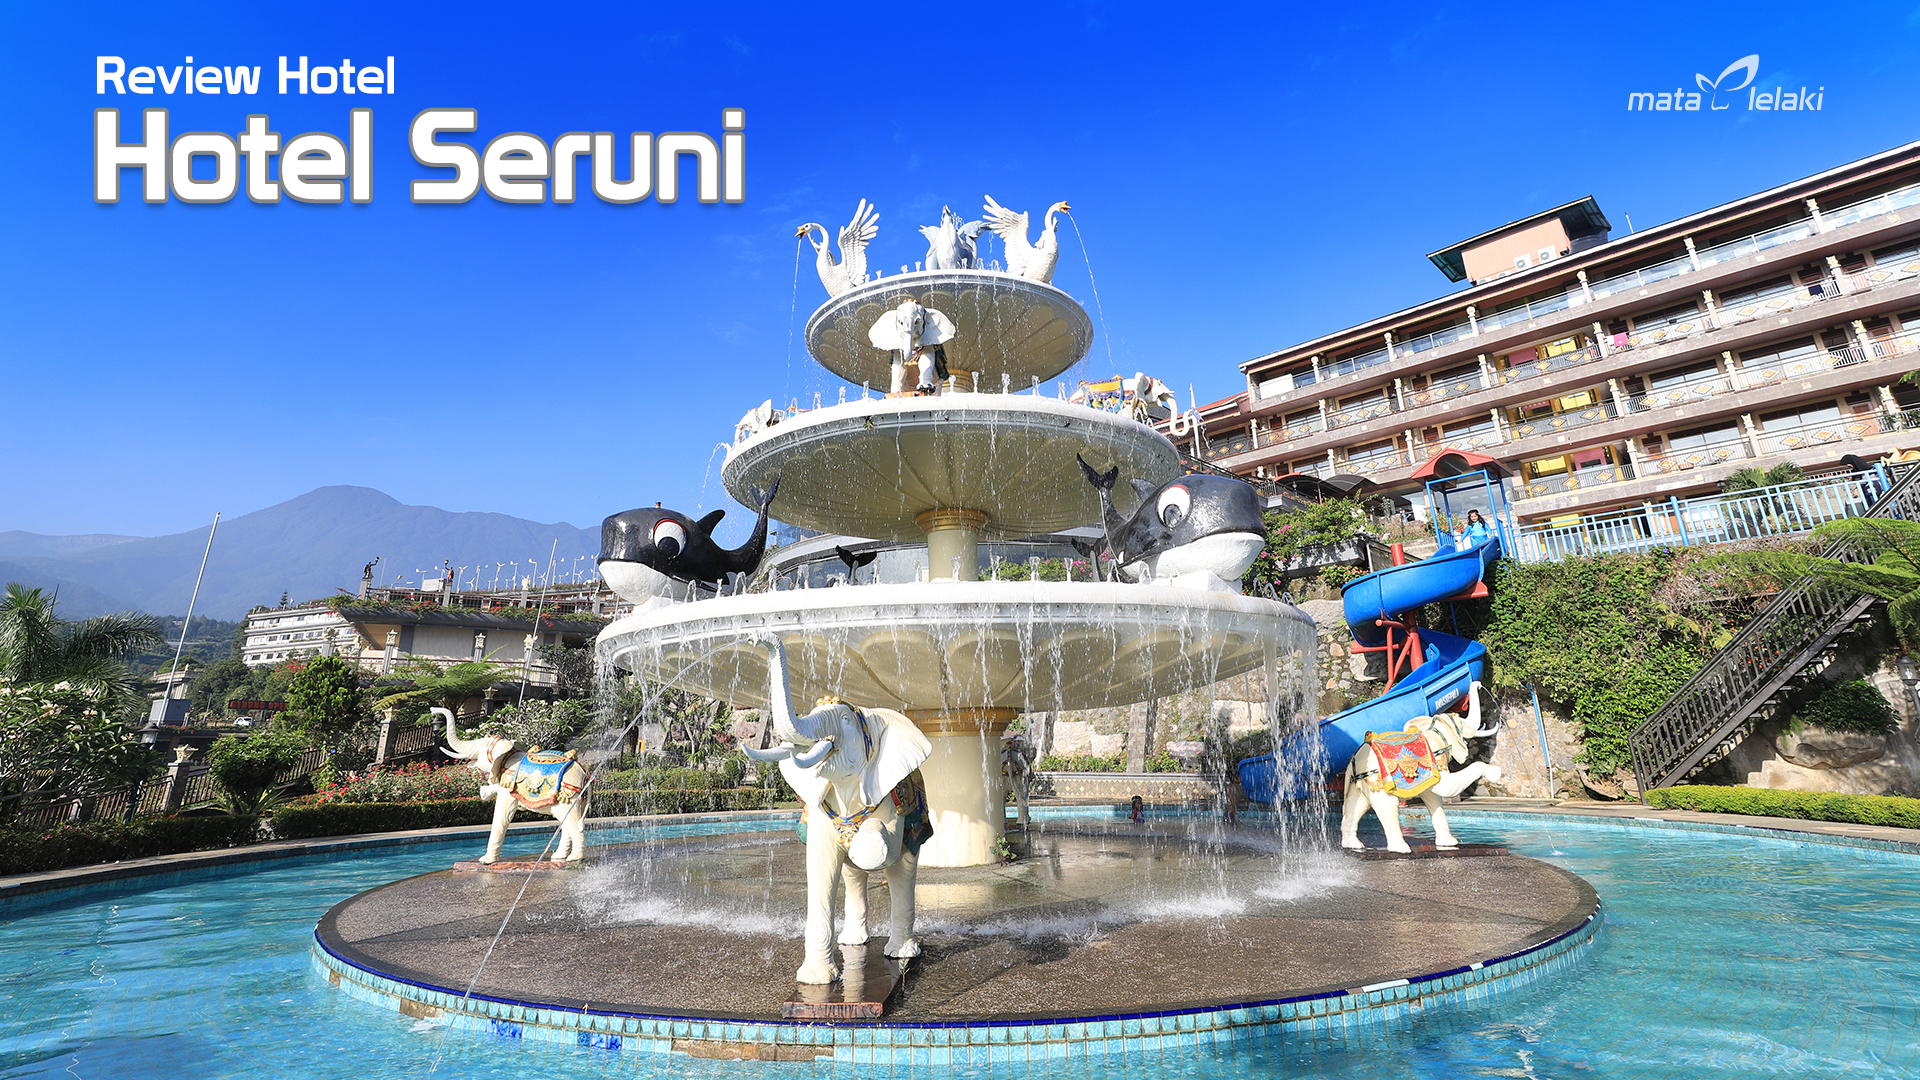 Review Hotel Seruni Bogor : The Fountains Hotel